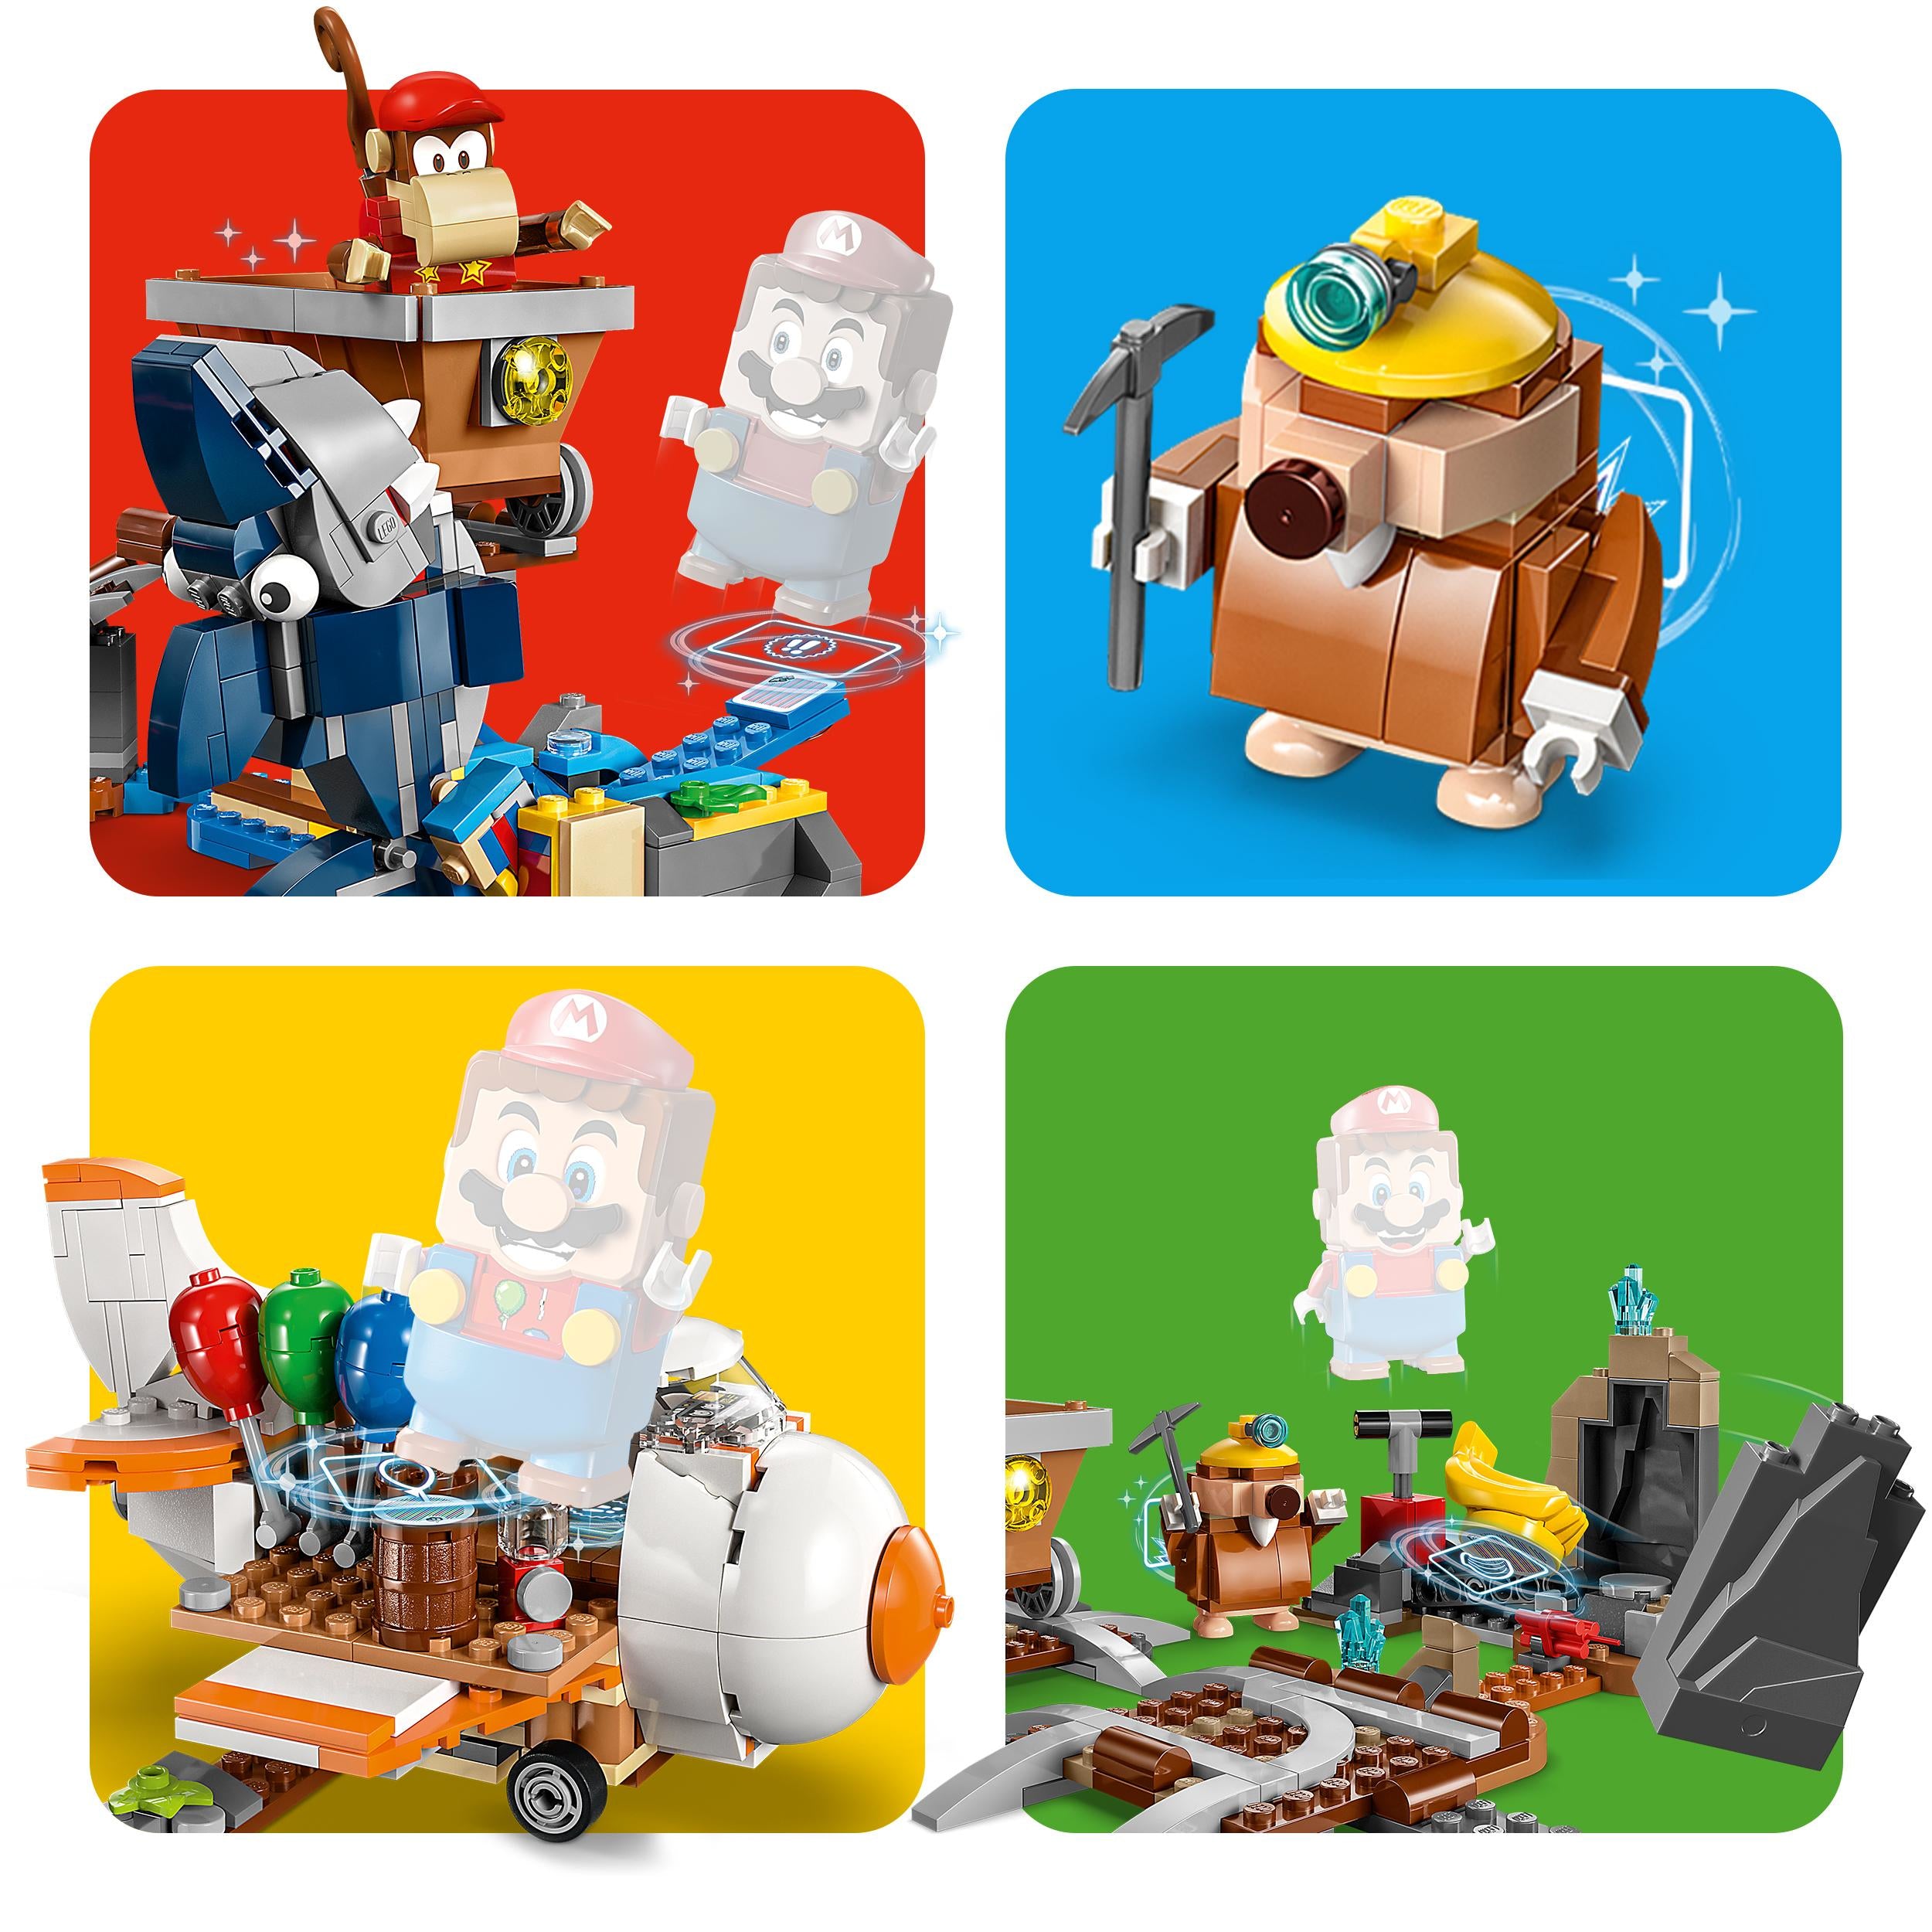 LEGO 71425 Super Mario Diddy Kong's Mine Cart Ride Expansion Set, Build and Play an Iconic Game Level with Toy Track Challenge, Buildable Aeroplane and 4 Character Figures, For Kids, Boys, Girls